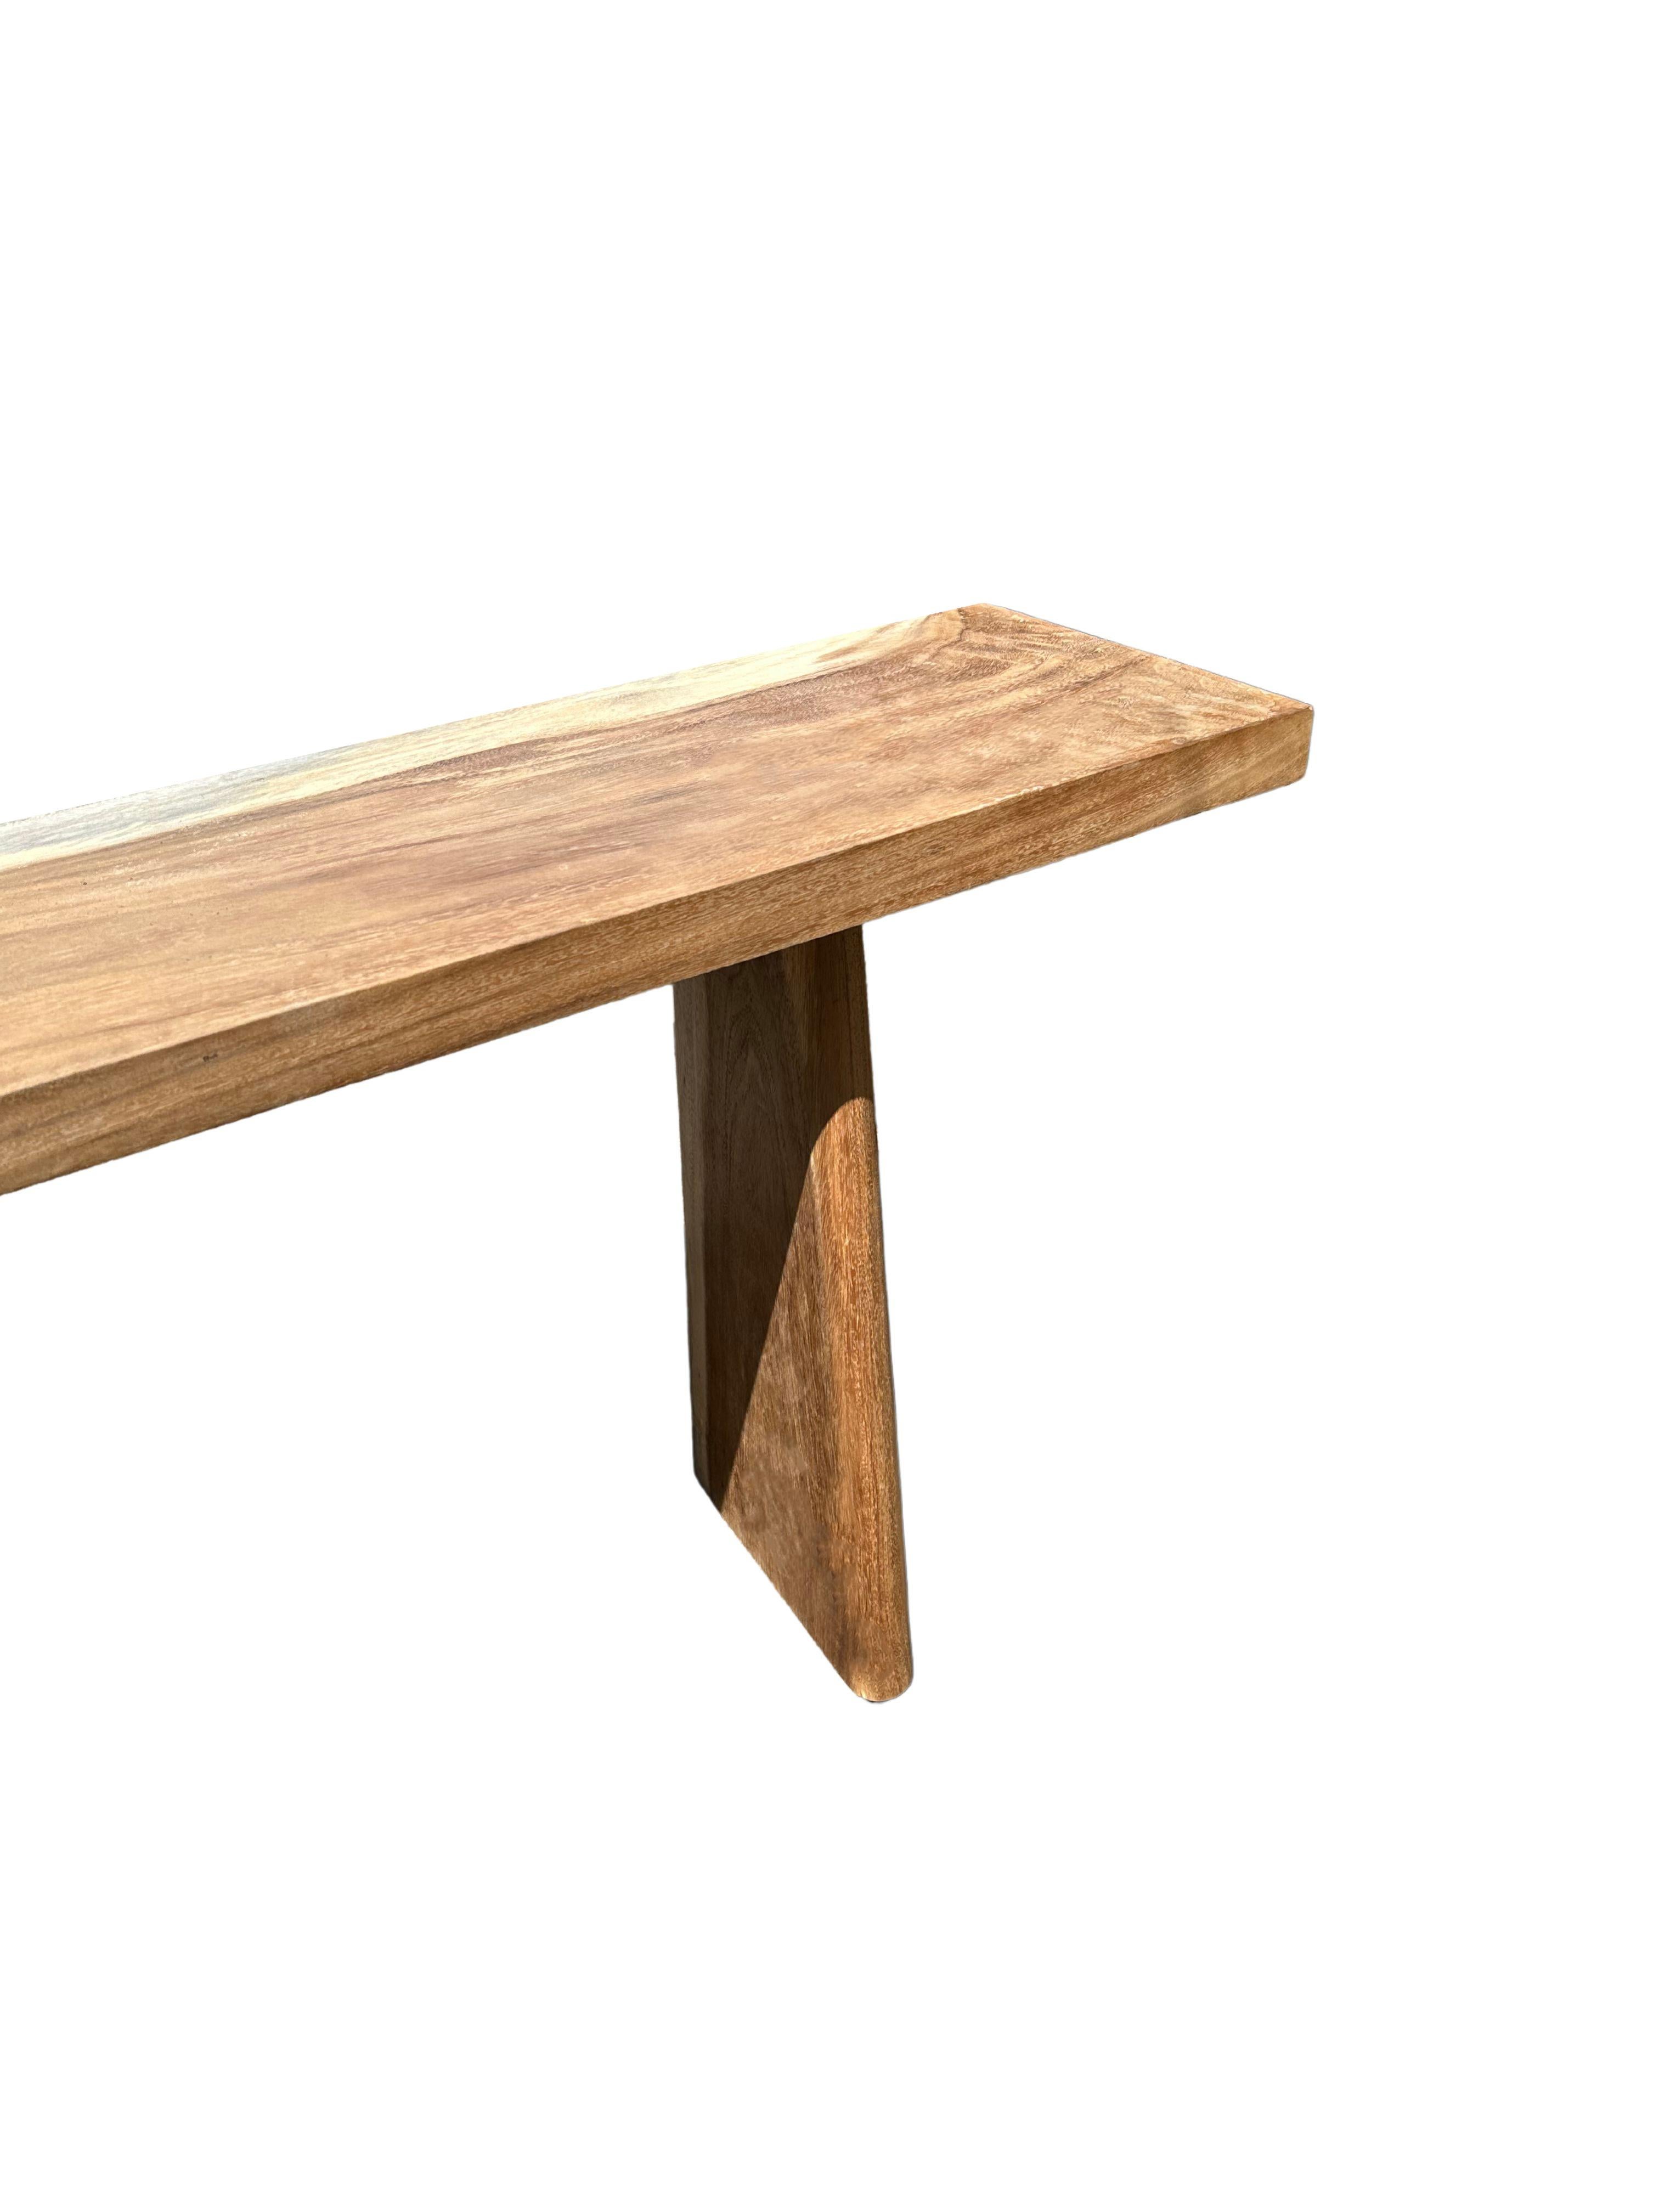 Other Solid Mango Wood Console Table, Natural Finish Modern Organic For Sale